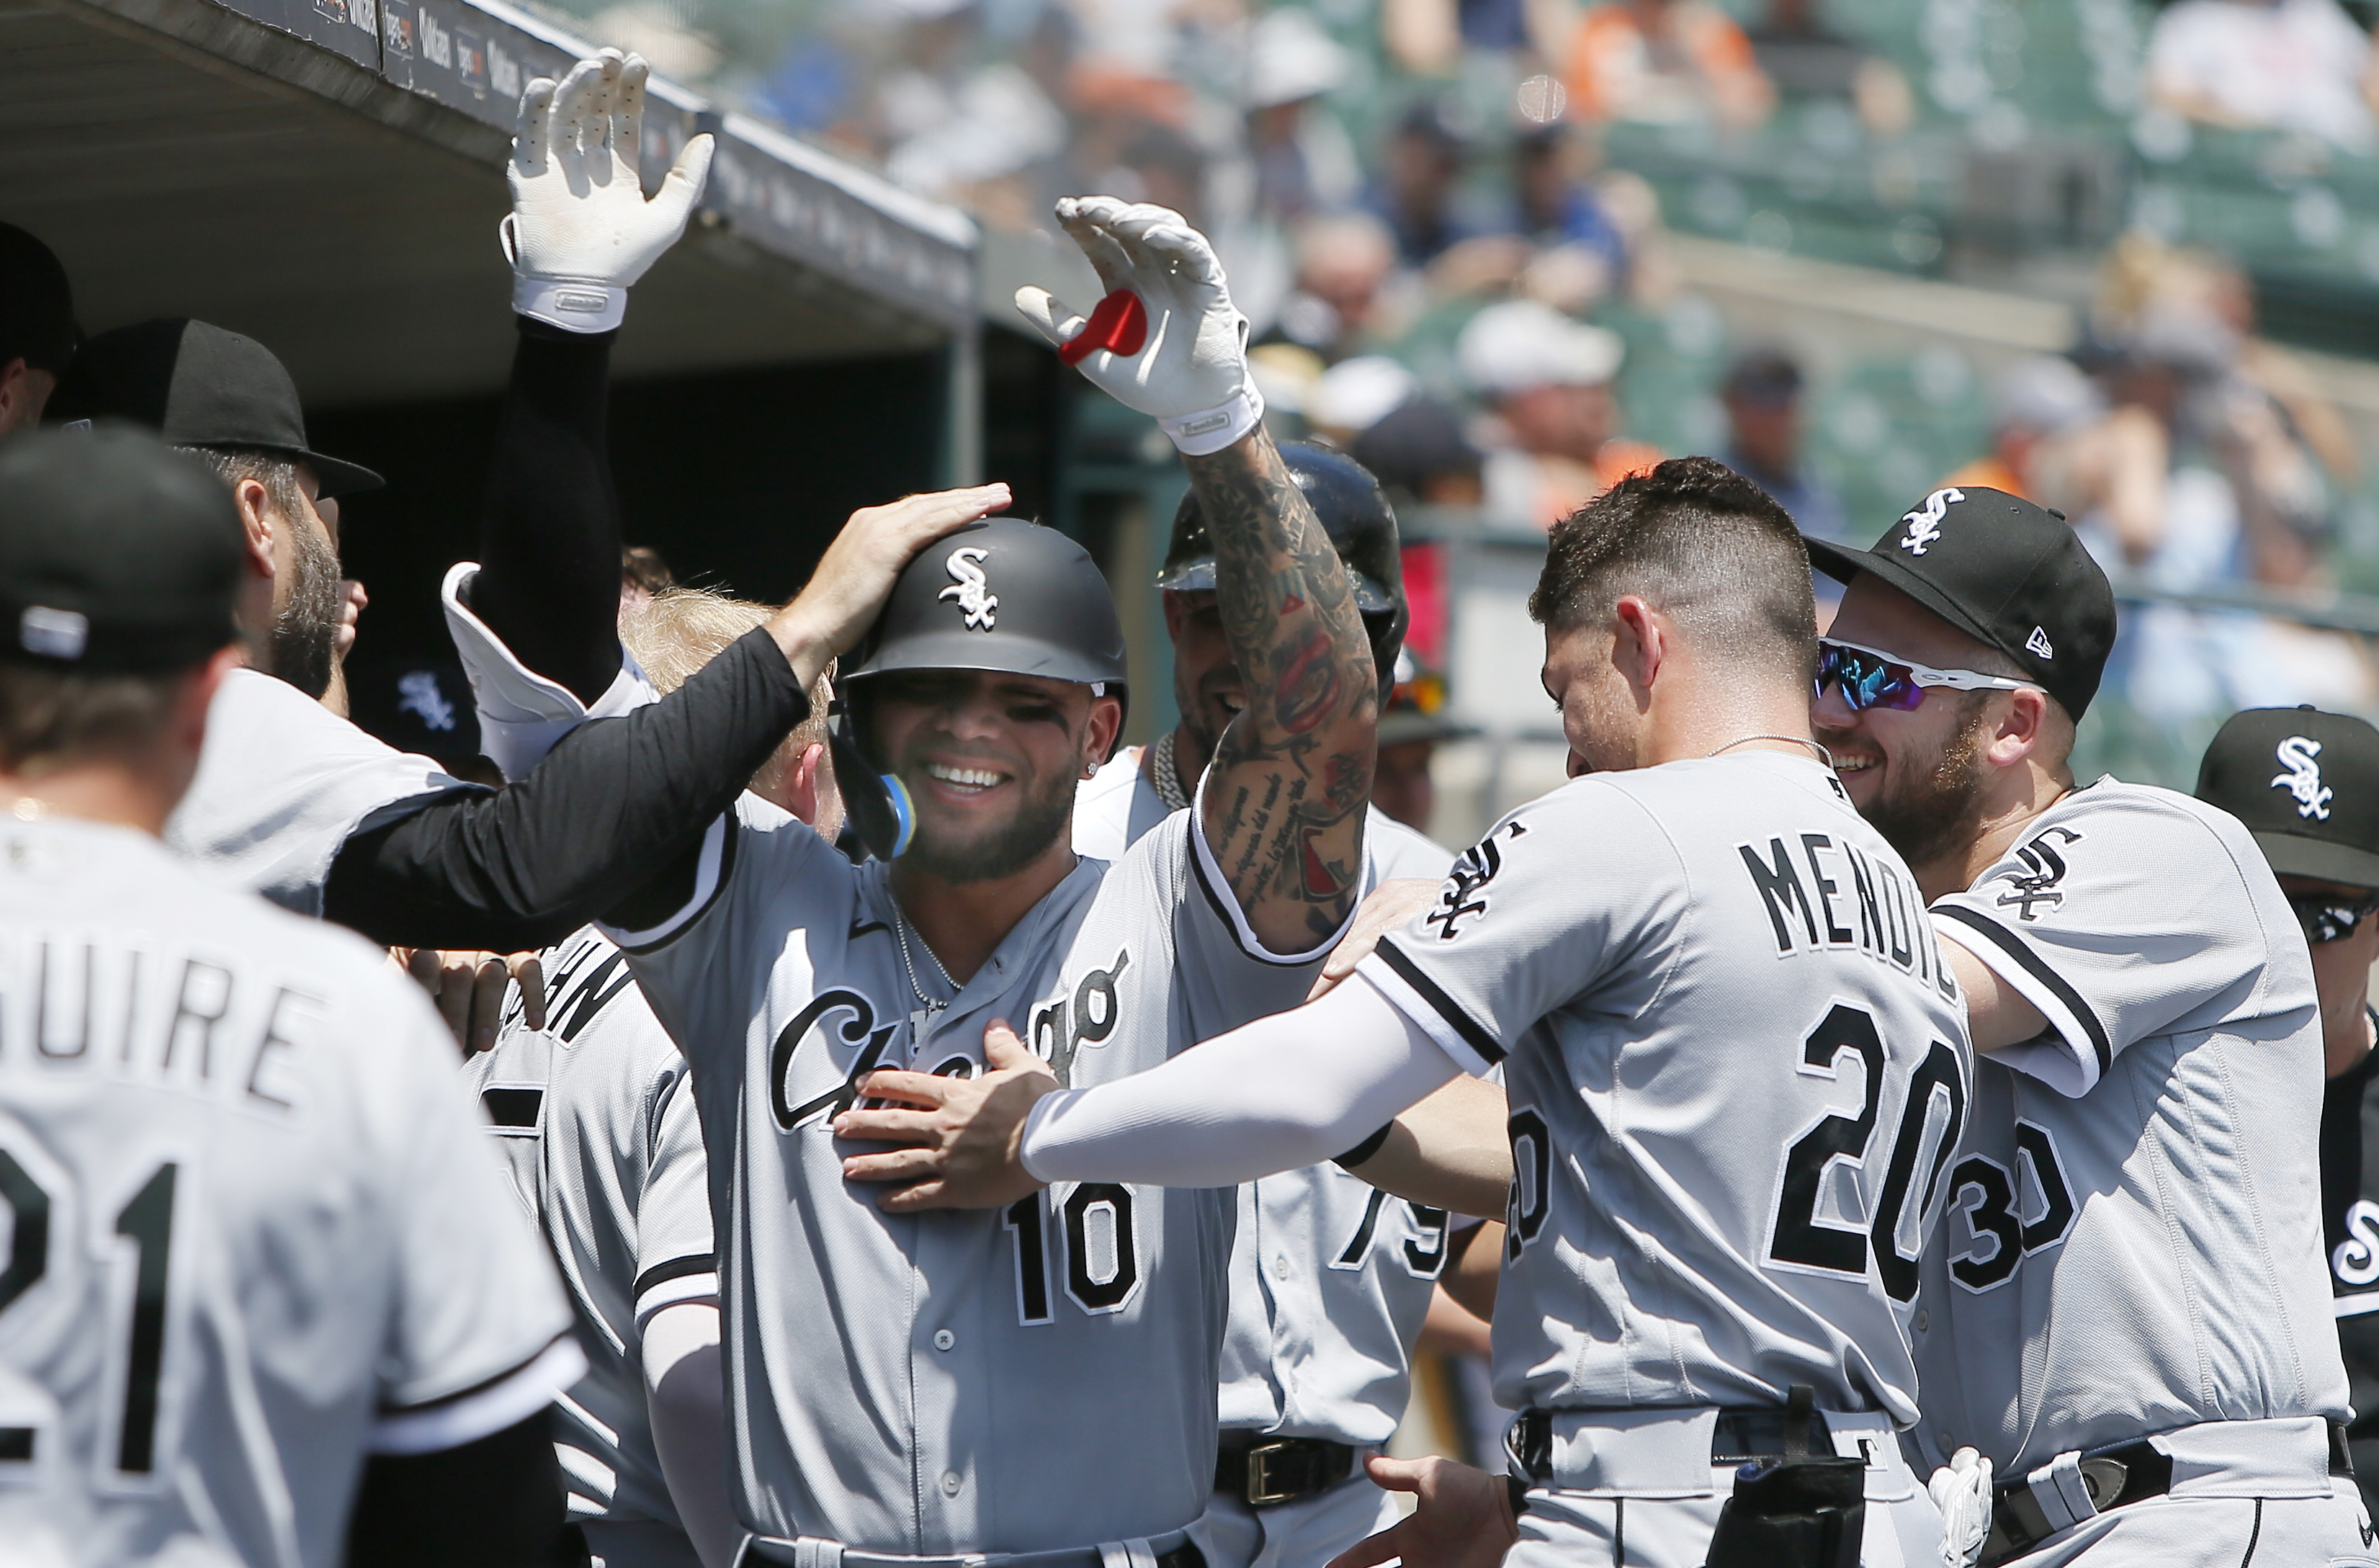 Yoán Moncada (5 hits, 5 RBIs) leads 22-hit barrage in White Sox sweep of  Tigers - The Boston Globe